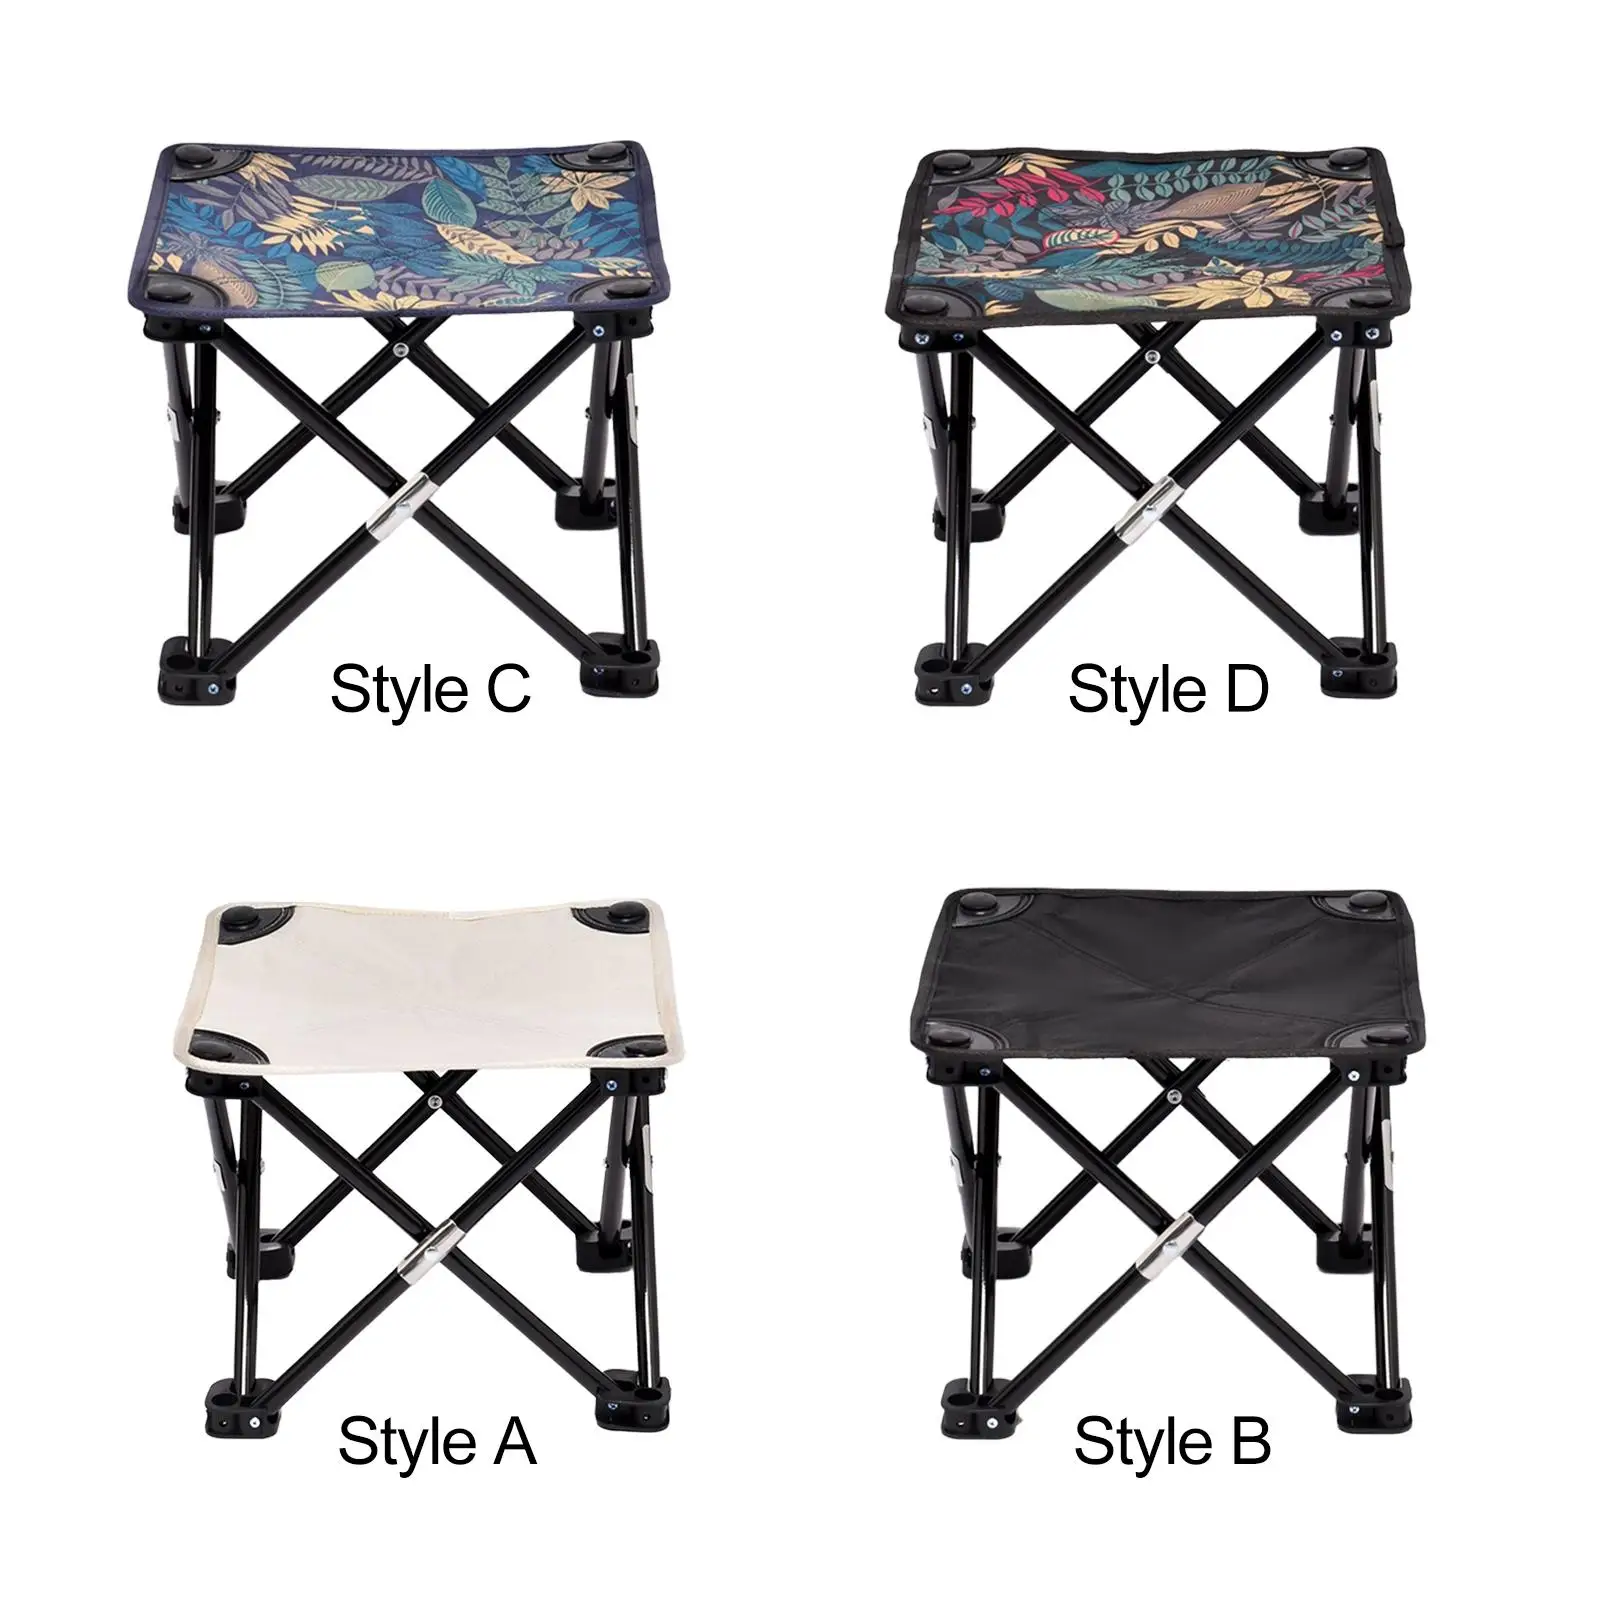 Folding Stool Lounger Chair Ottoman recliner Foot Rest Saddle Chair Fishing Chairs for Lounge Hiking Backpacking Travel Patio